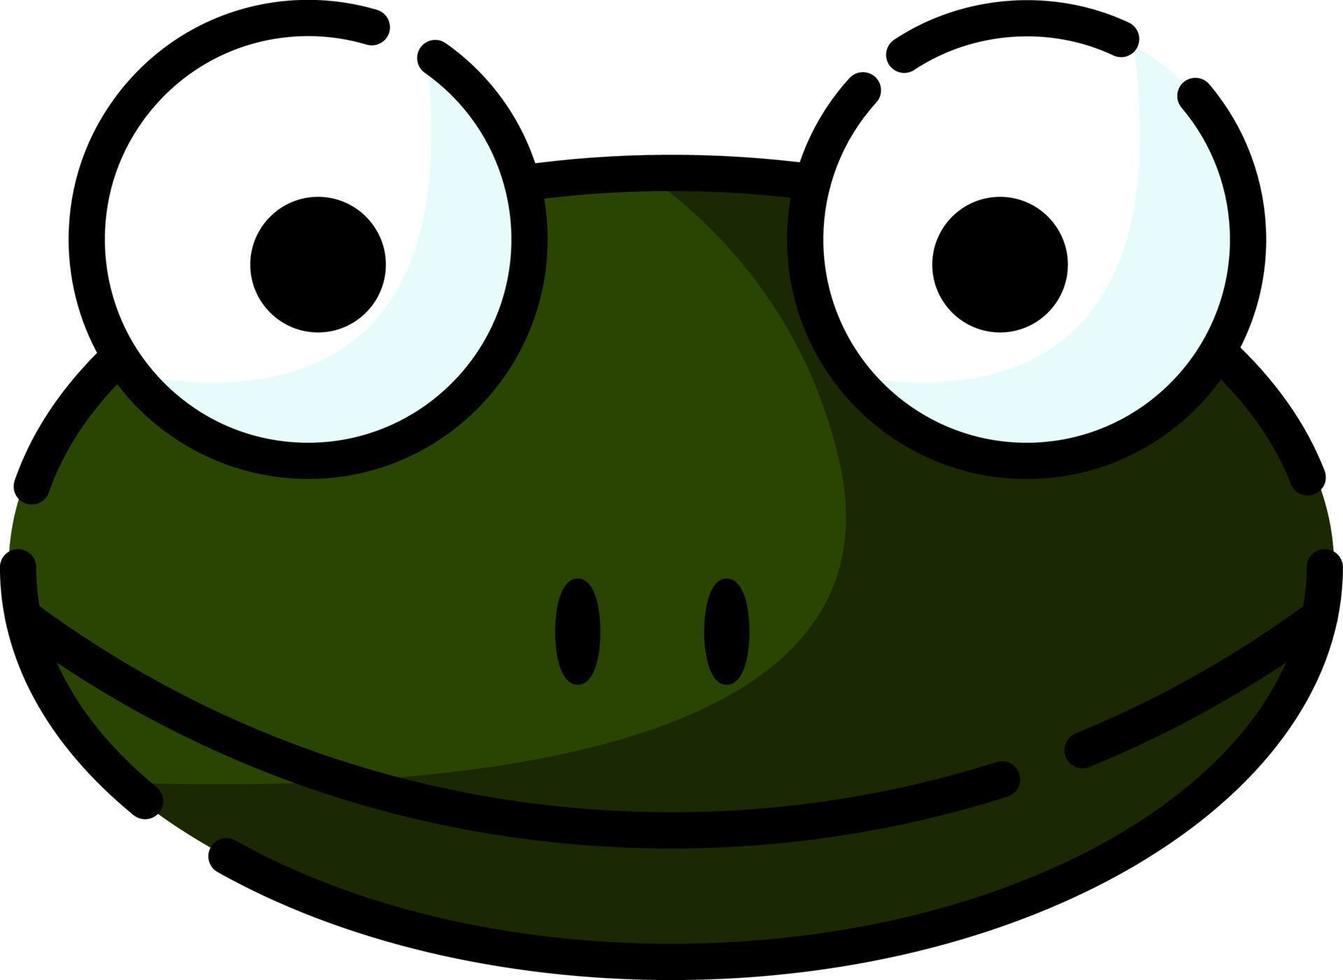 Green frog, illustration, vector on a white background.